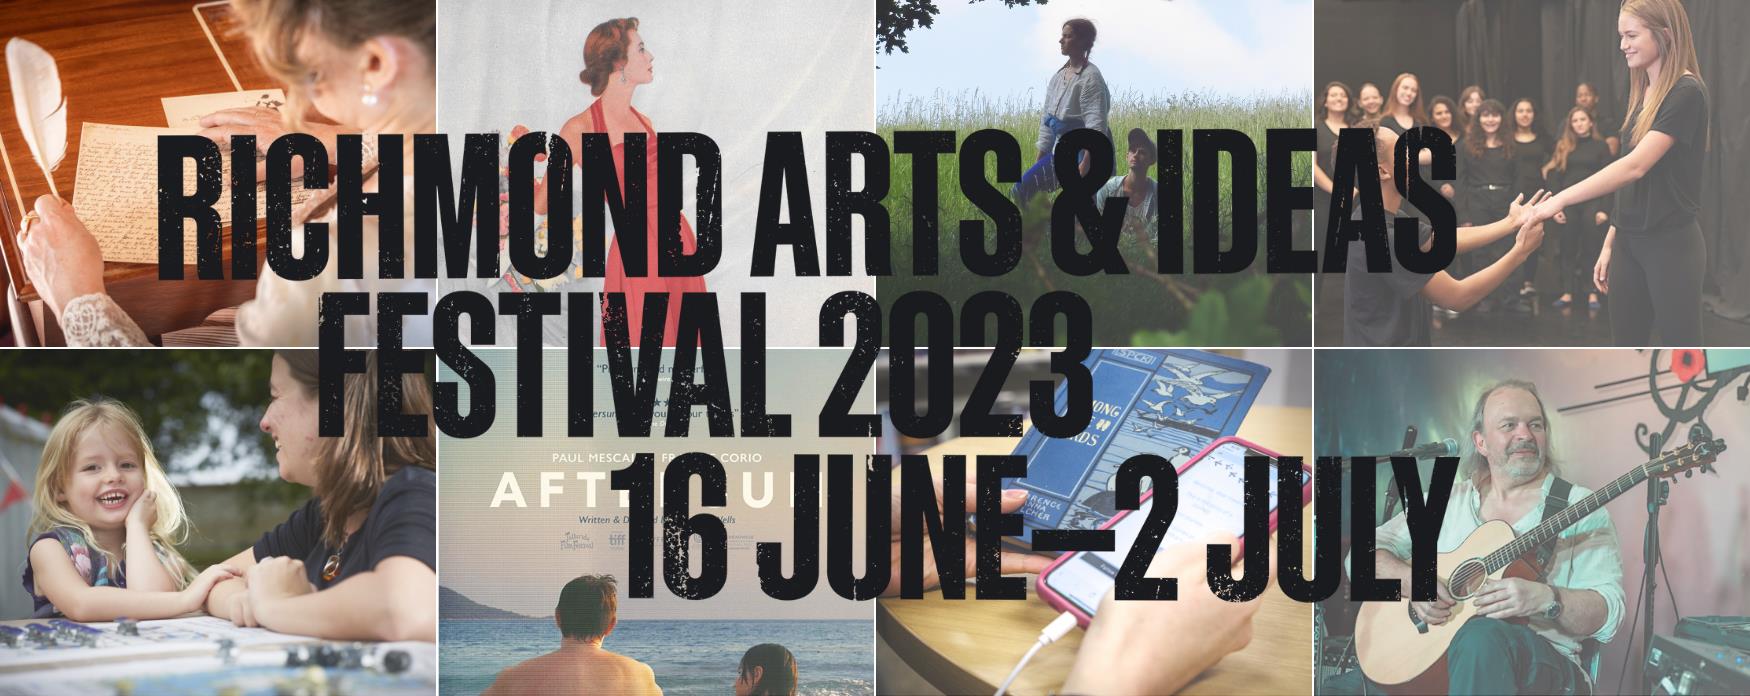 A collage of event images taking place in Richmond Arts and Ideas Festival